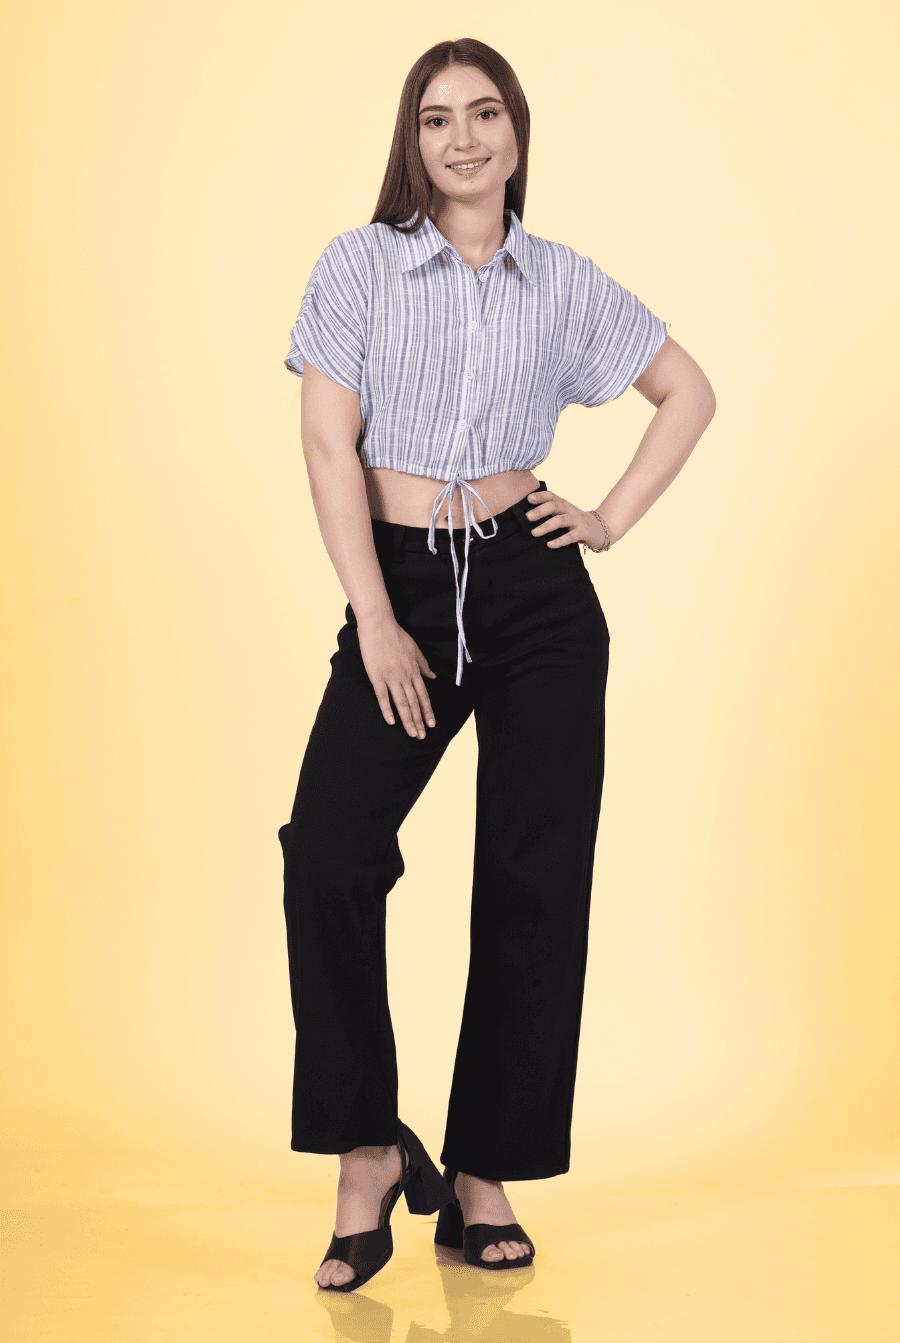 a woman posing for a picture in a striped shirt and black pants designed with winslets patterns